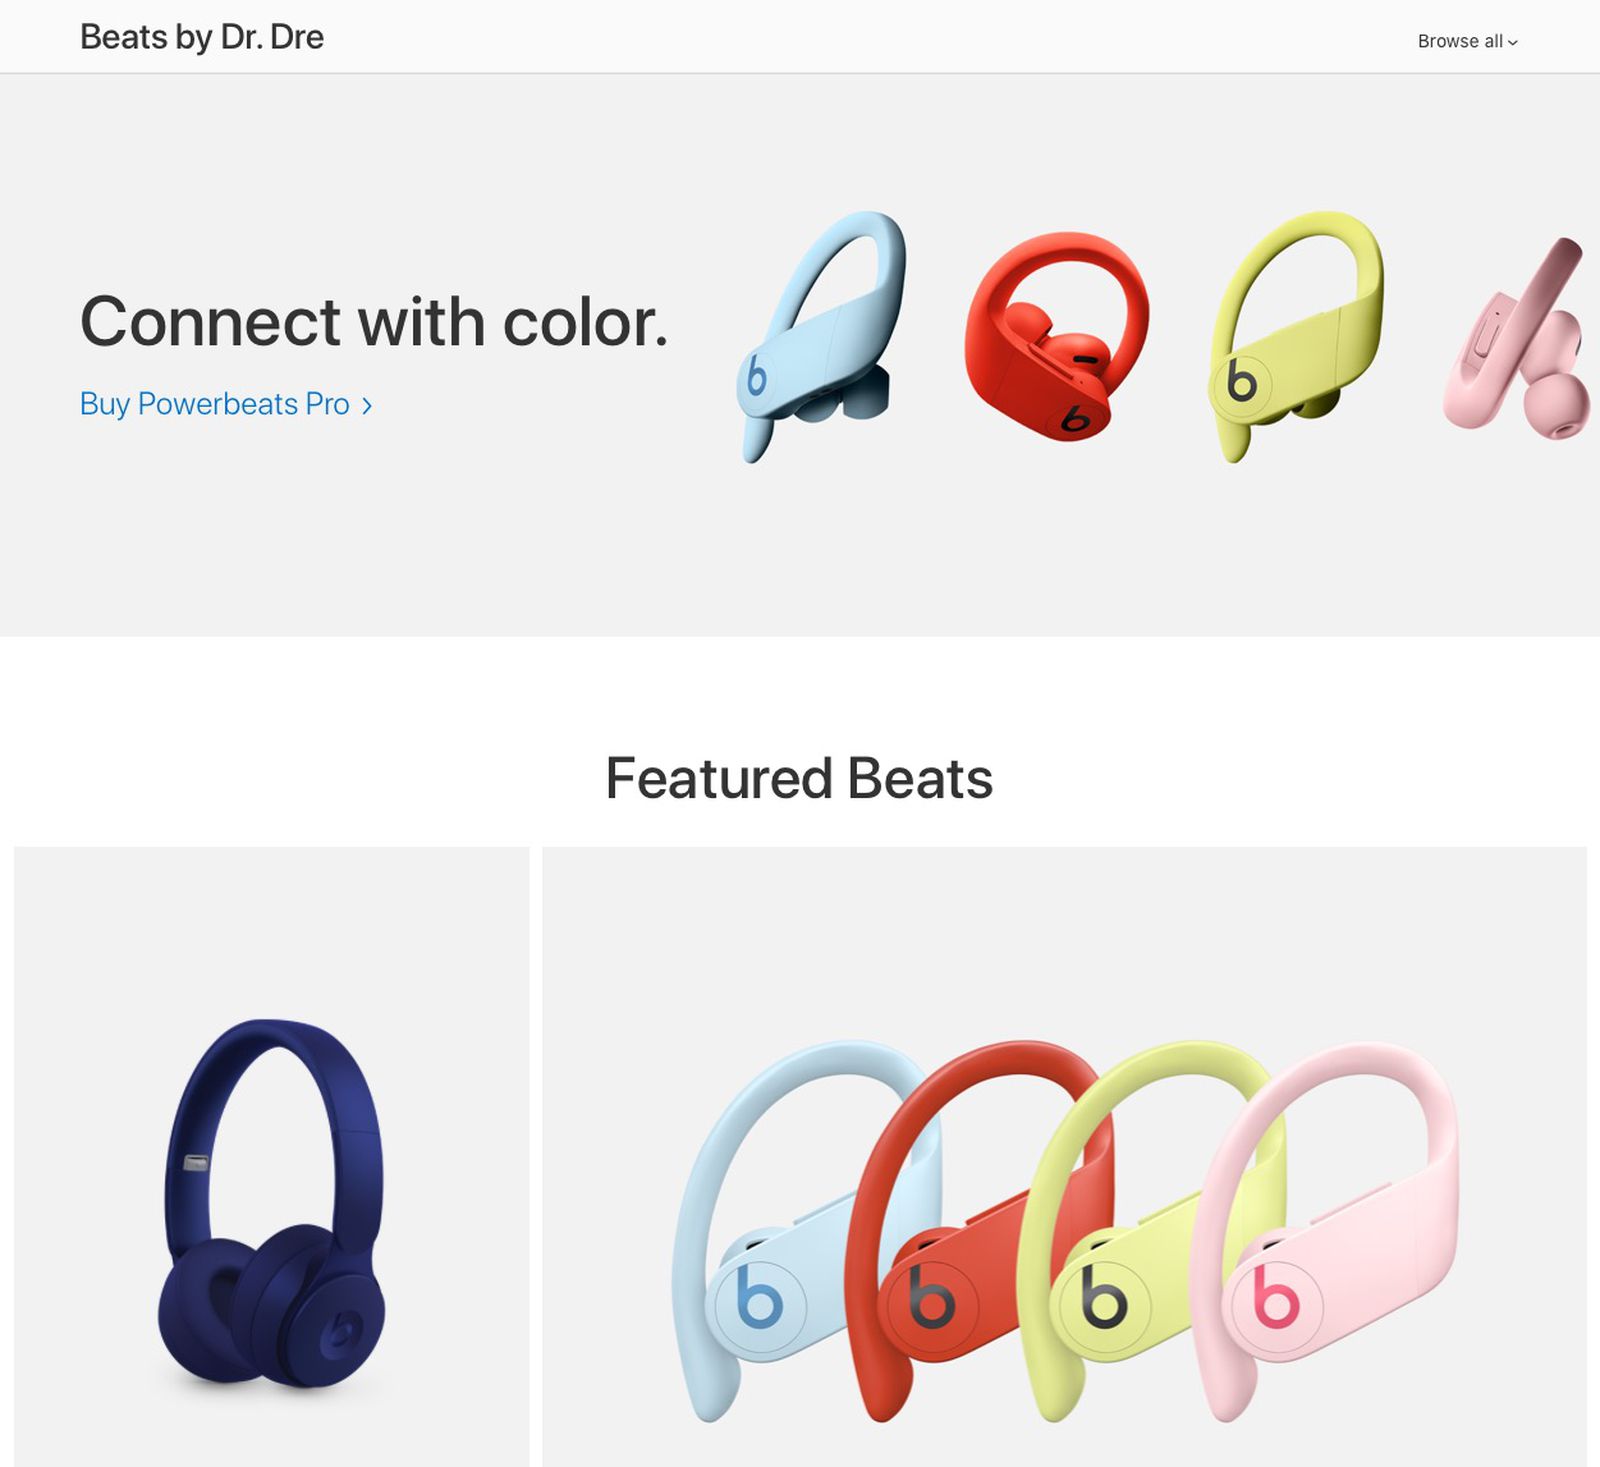 Apple Removes Beats Landing Page From Website Ahead of Tuesday's Launch [Update: Restored] -